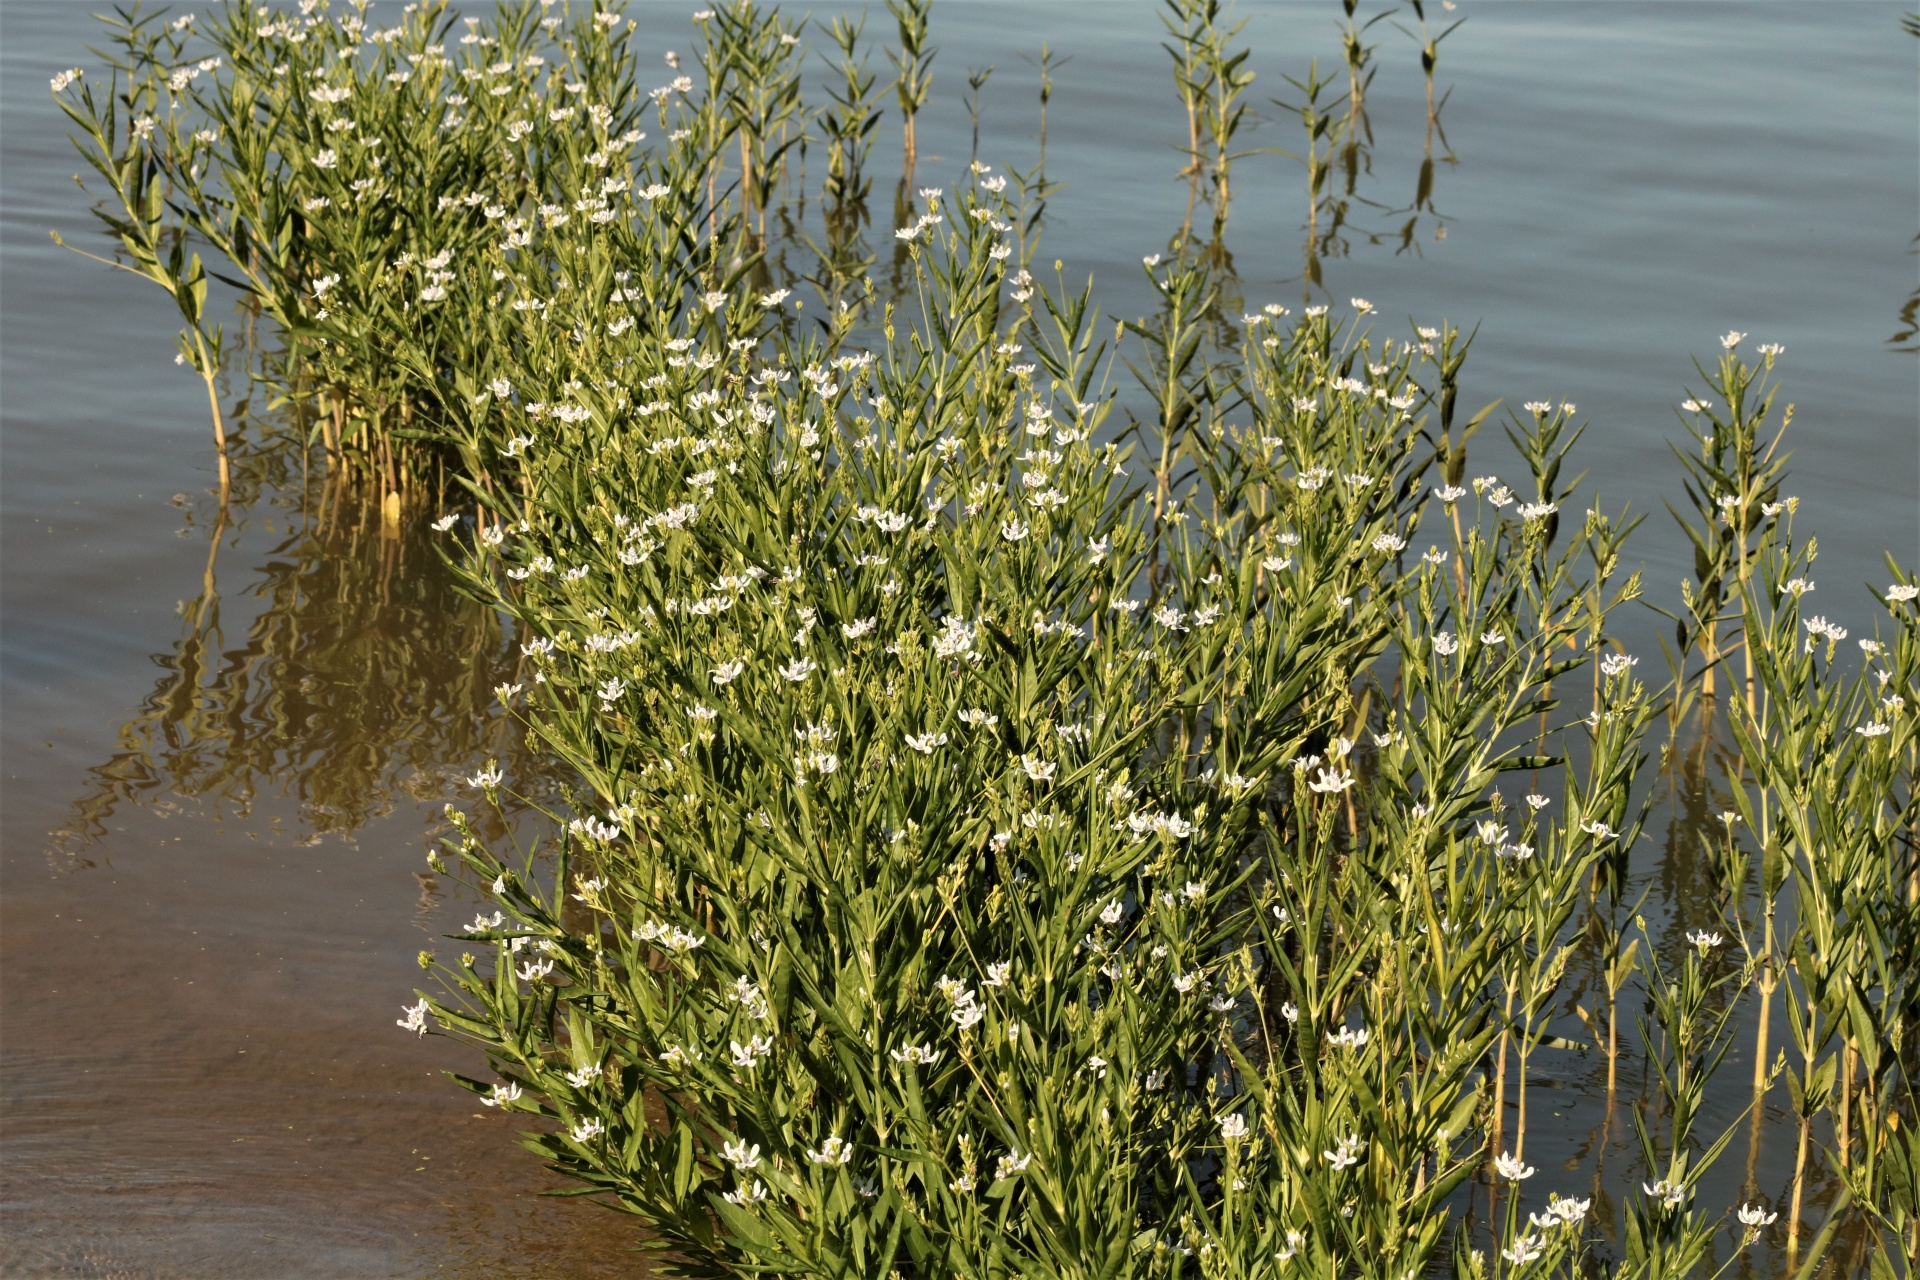 A line of American water willow plants growing in the shallow water of a blue lake.